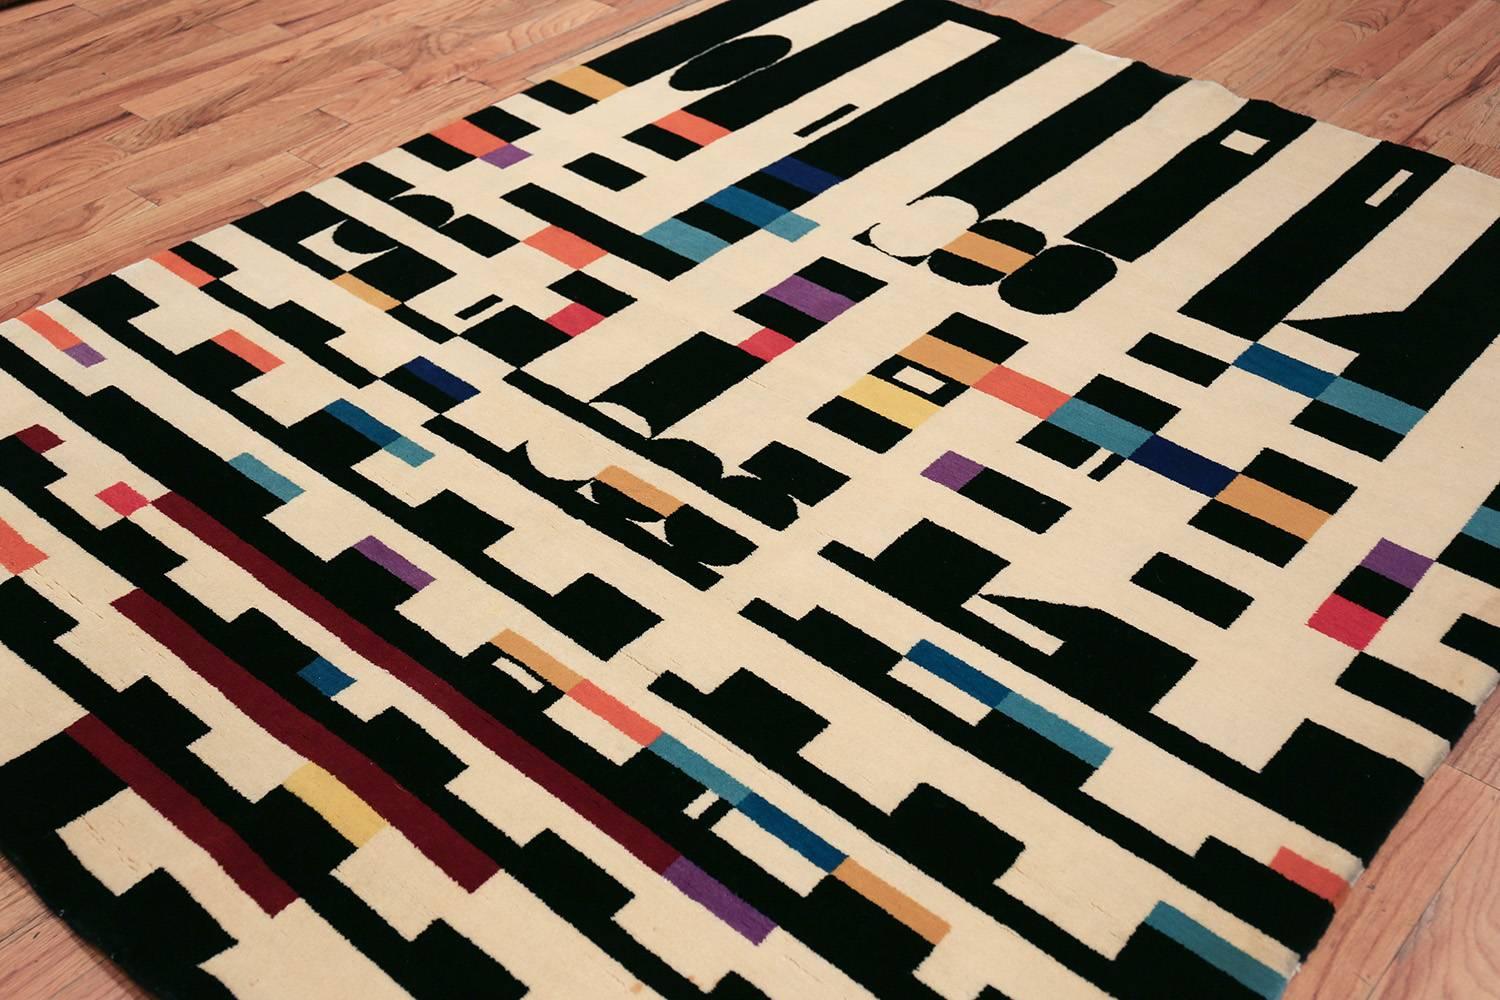 Mid-Century Modern Vintage Geometric Israeli Rug by Yaacov Agam. Size: 5 ft 7 in x 7 ft 1 in